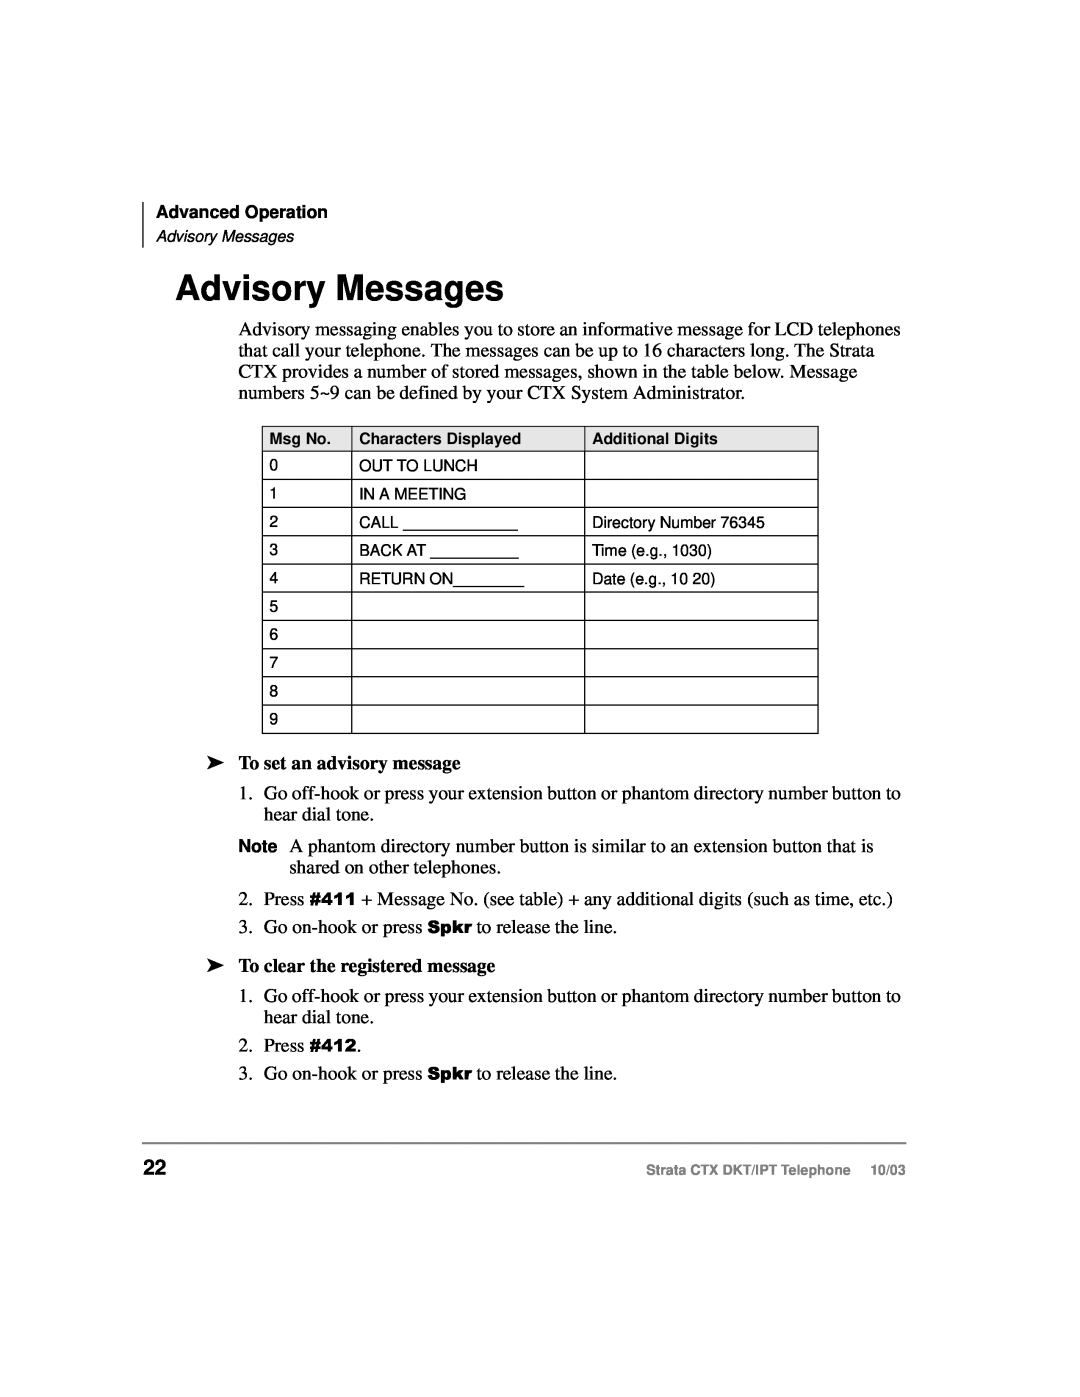 Toshiba IPT, DKT manual Advisory Messages, To set an advisory message, To clear the registered message 